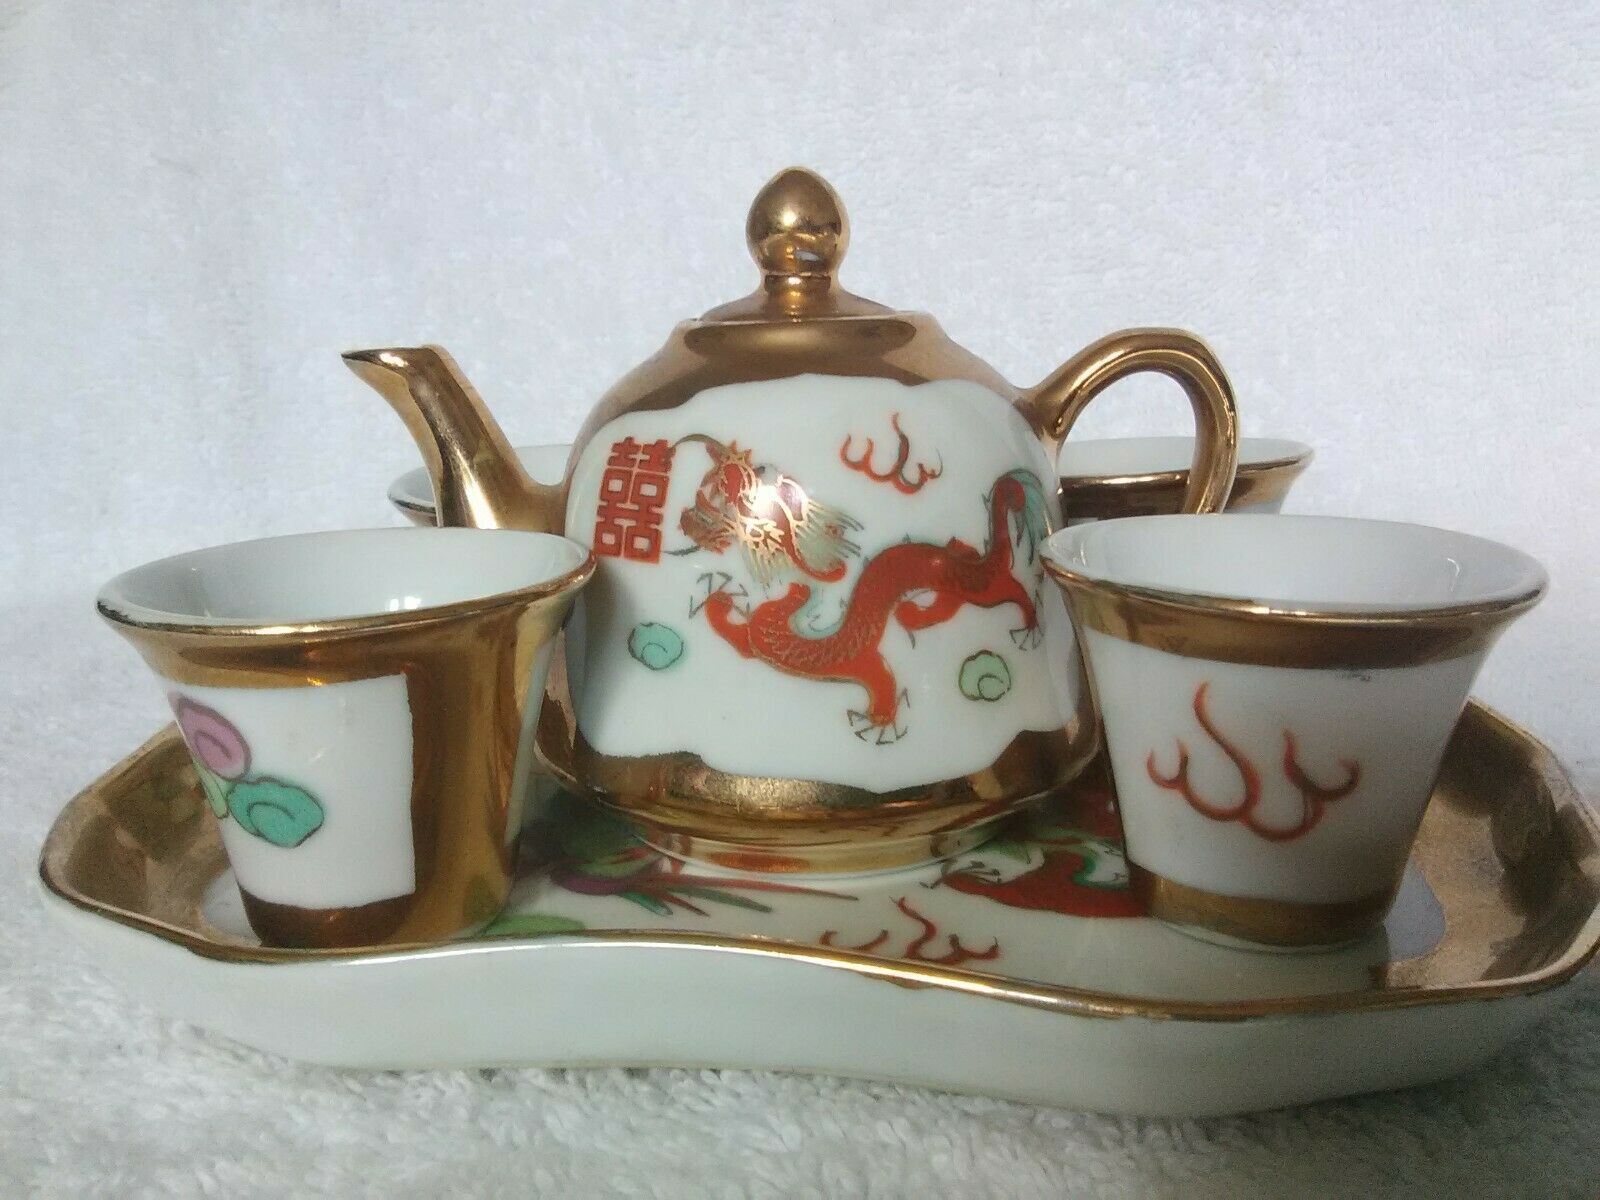 Antique Chinese Porcelain Gold Trimmed Wine Pot And Cups Set W/ Dragon & Phoenix